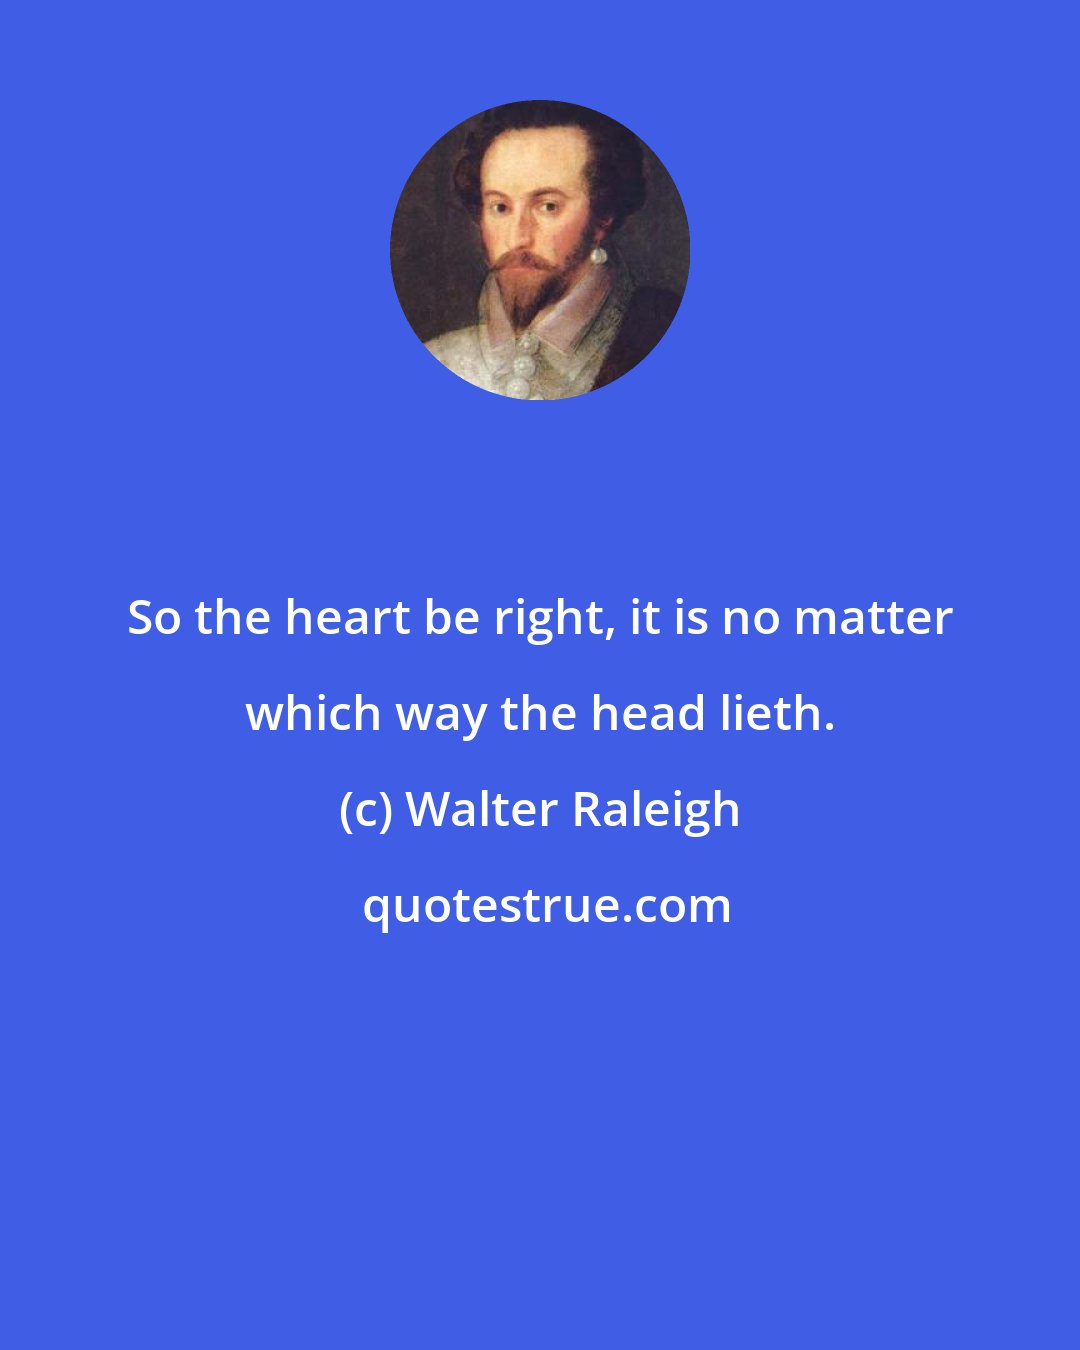 Walter Raleigh: So the heart be right, it is no matter which way the head lieth.